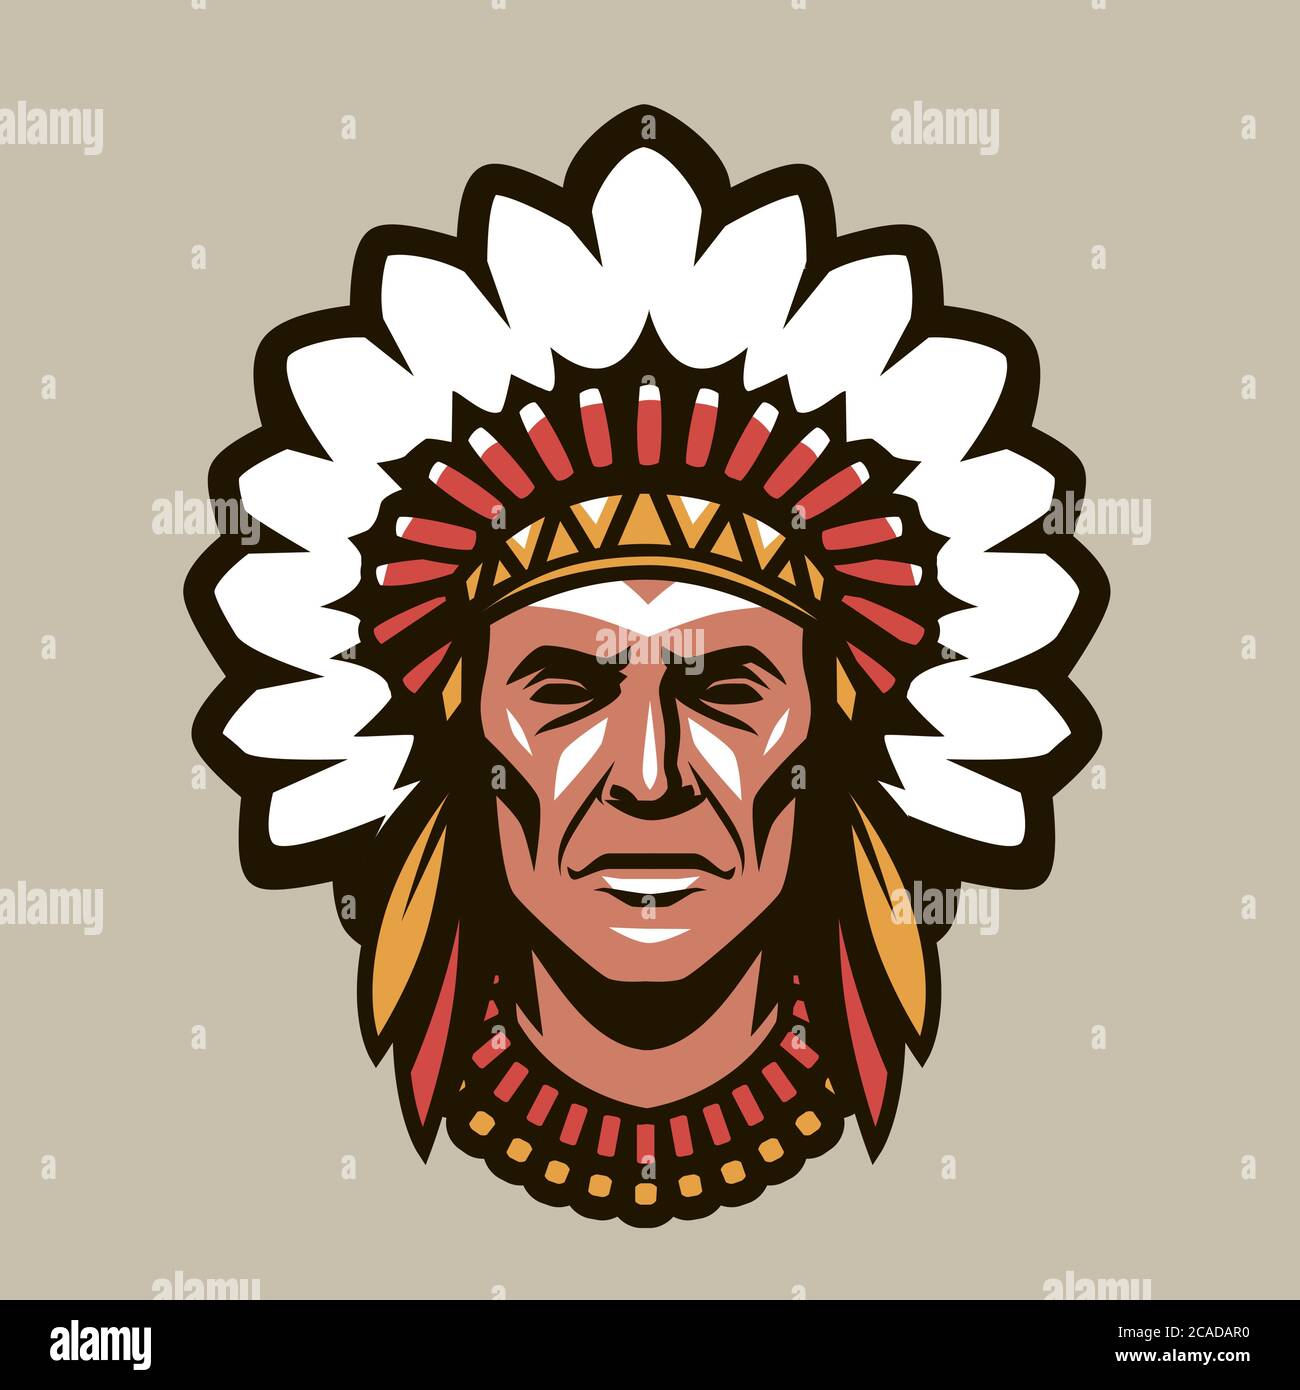 Indian chief in headdress of feathers. Warrior symbol or mascot Stock Vector